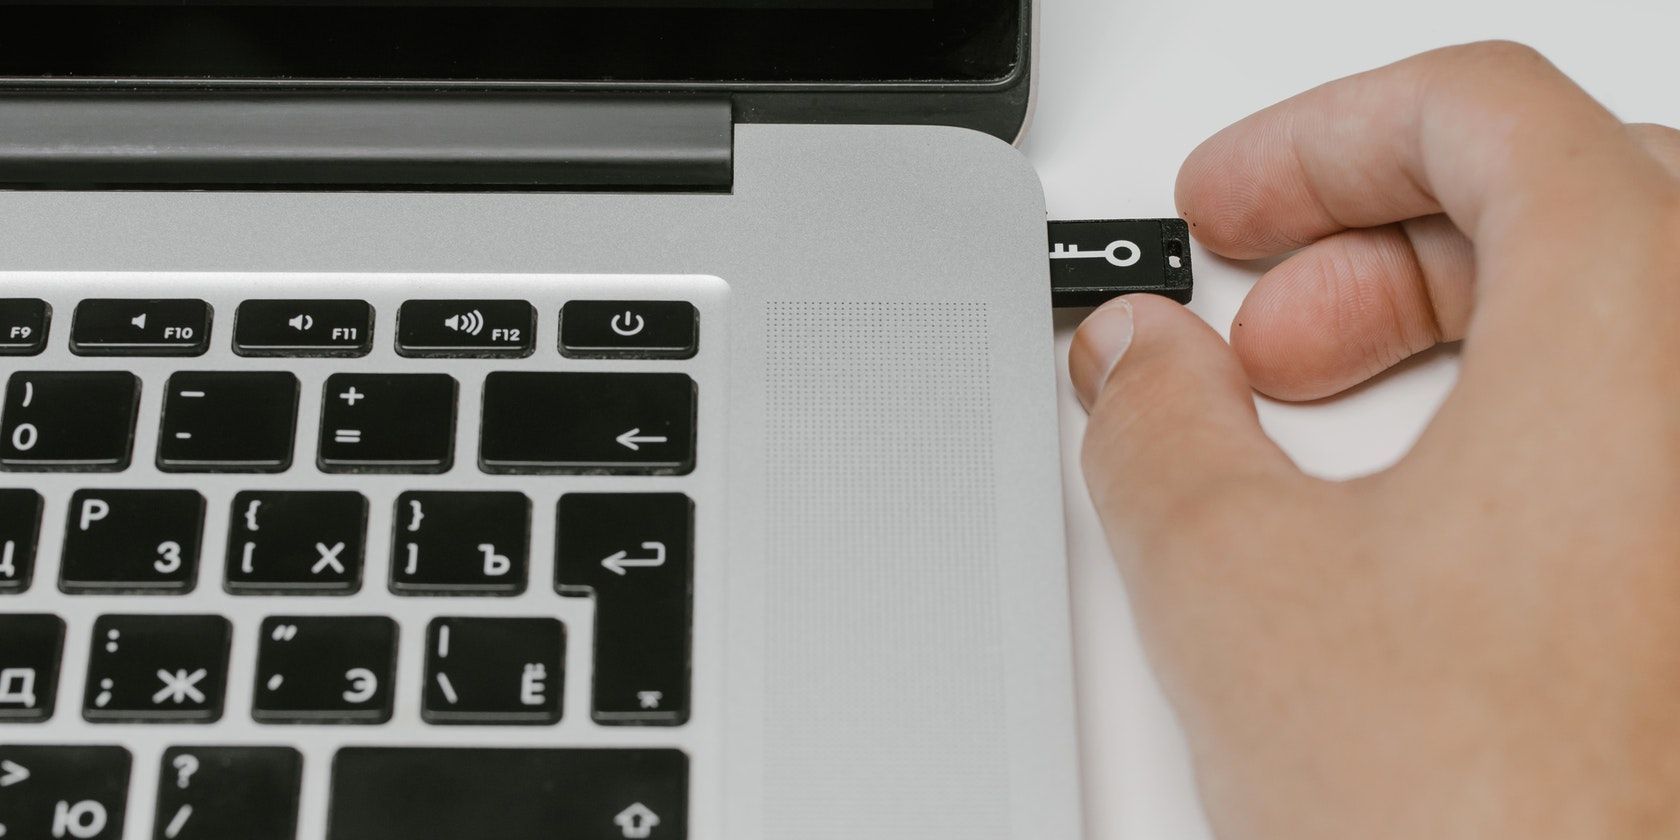 Close Up Image of a Man Inserting USB Drive To Laptop